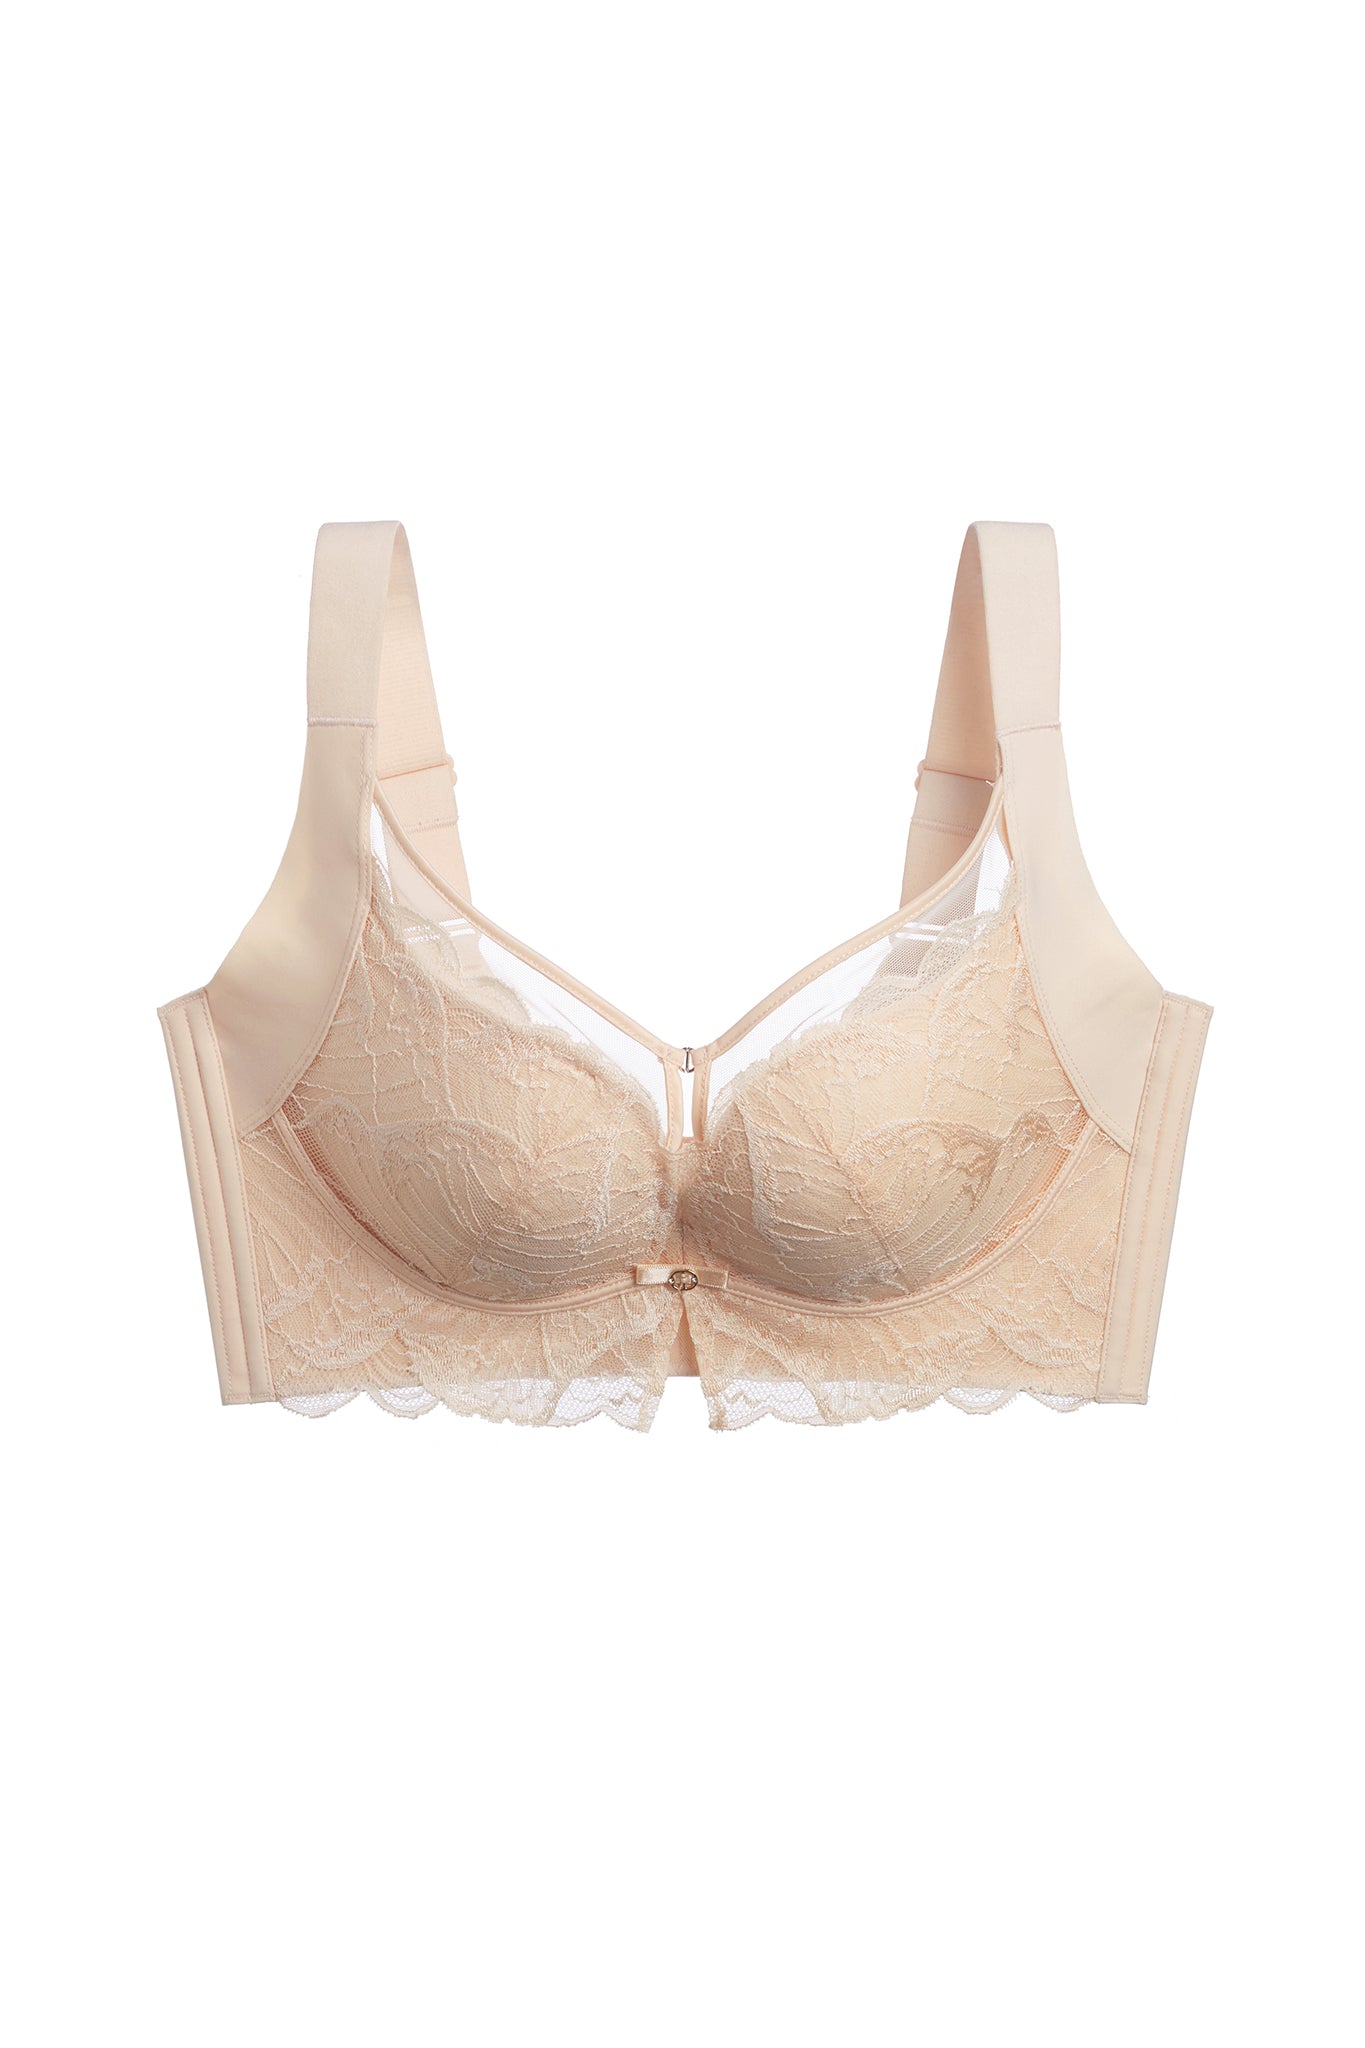 Leto Collection, Intimates & Sleepwear, Grey Lace Bralette